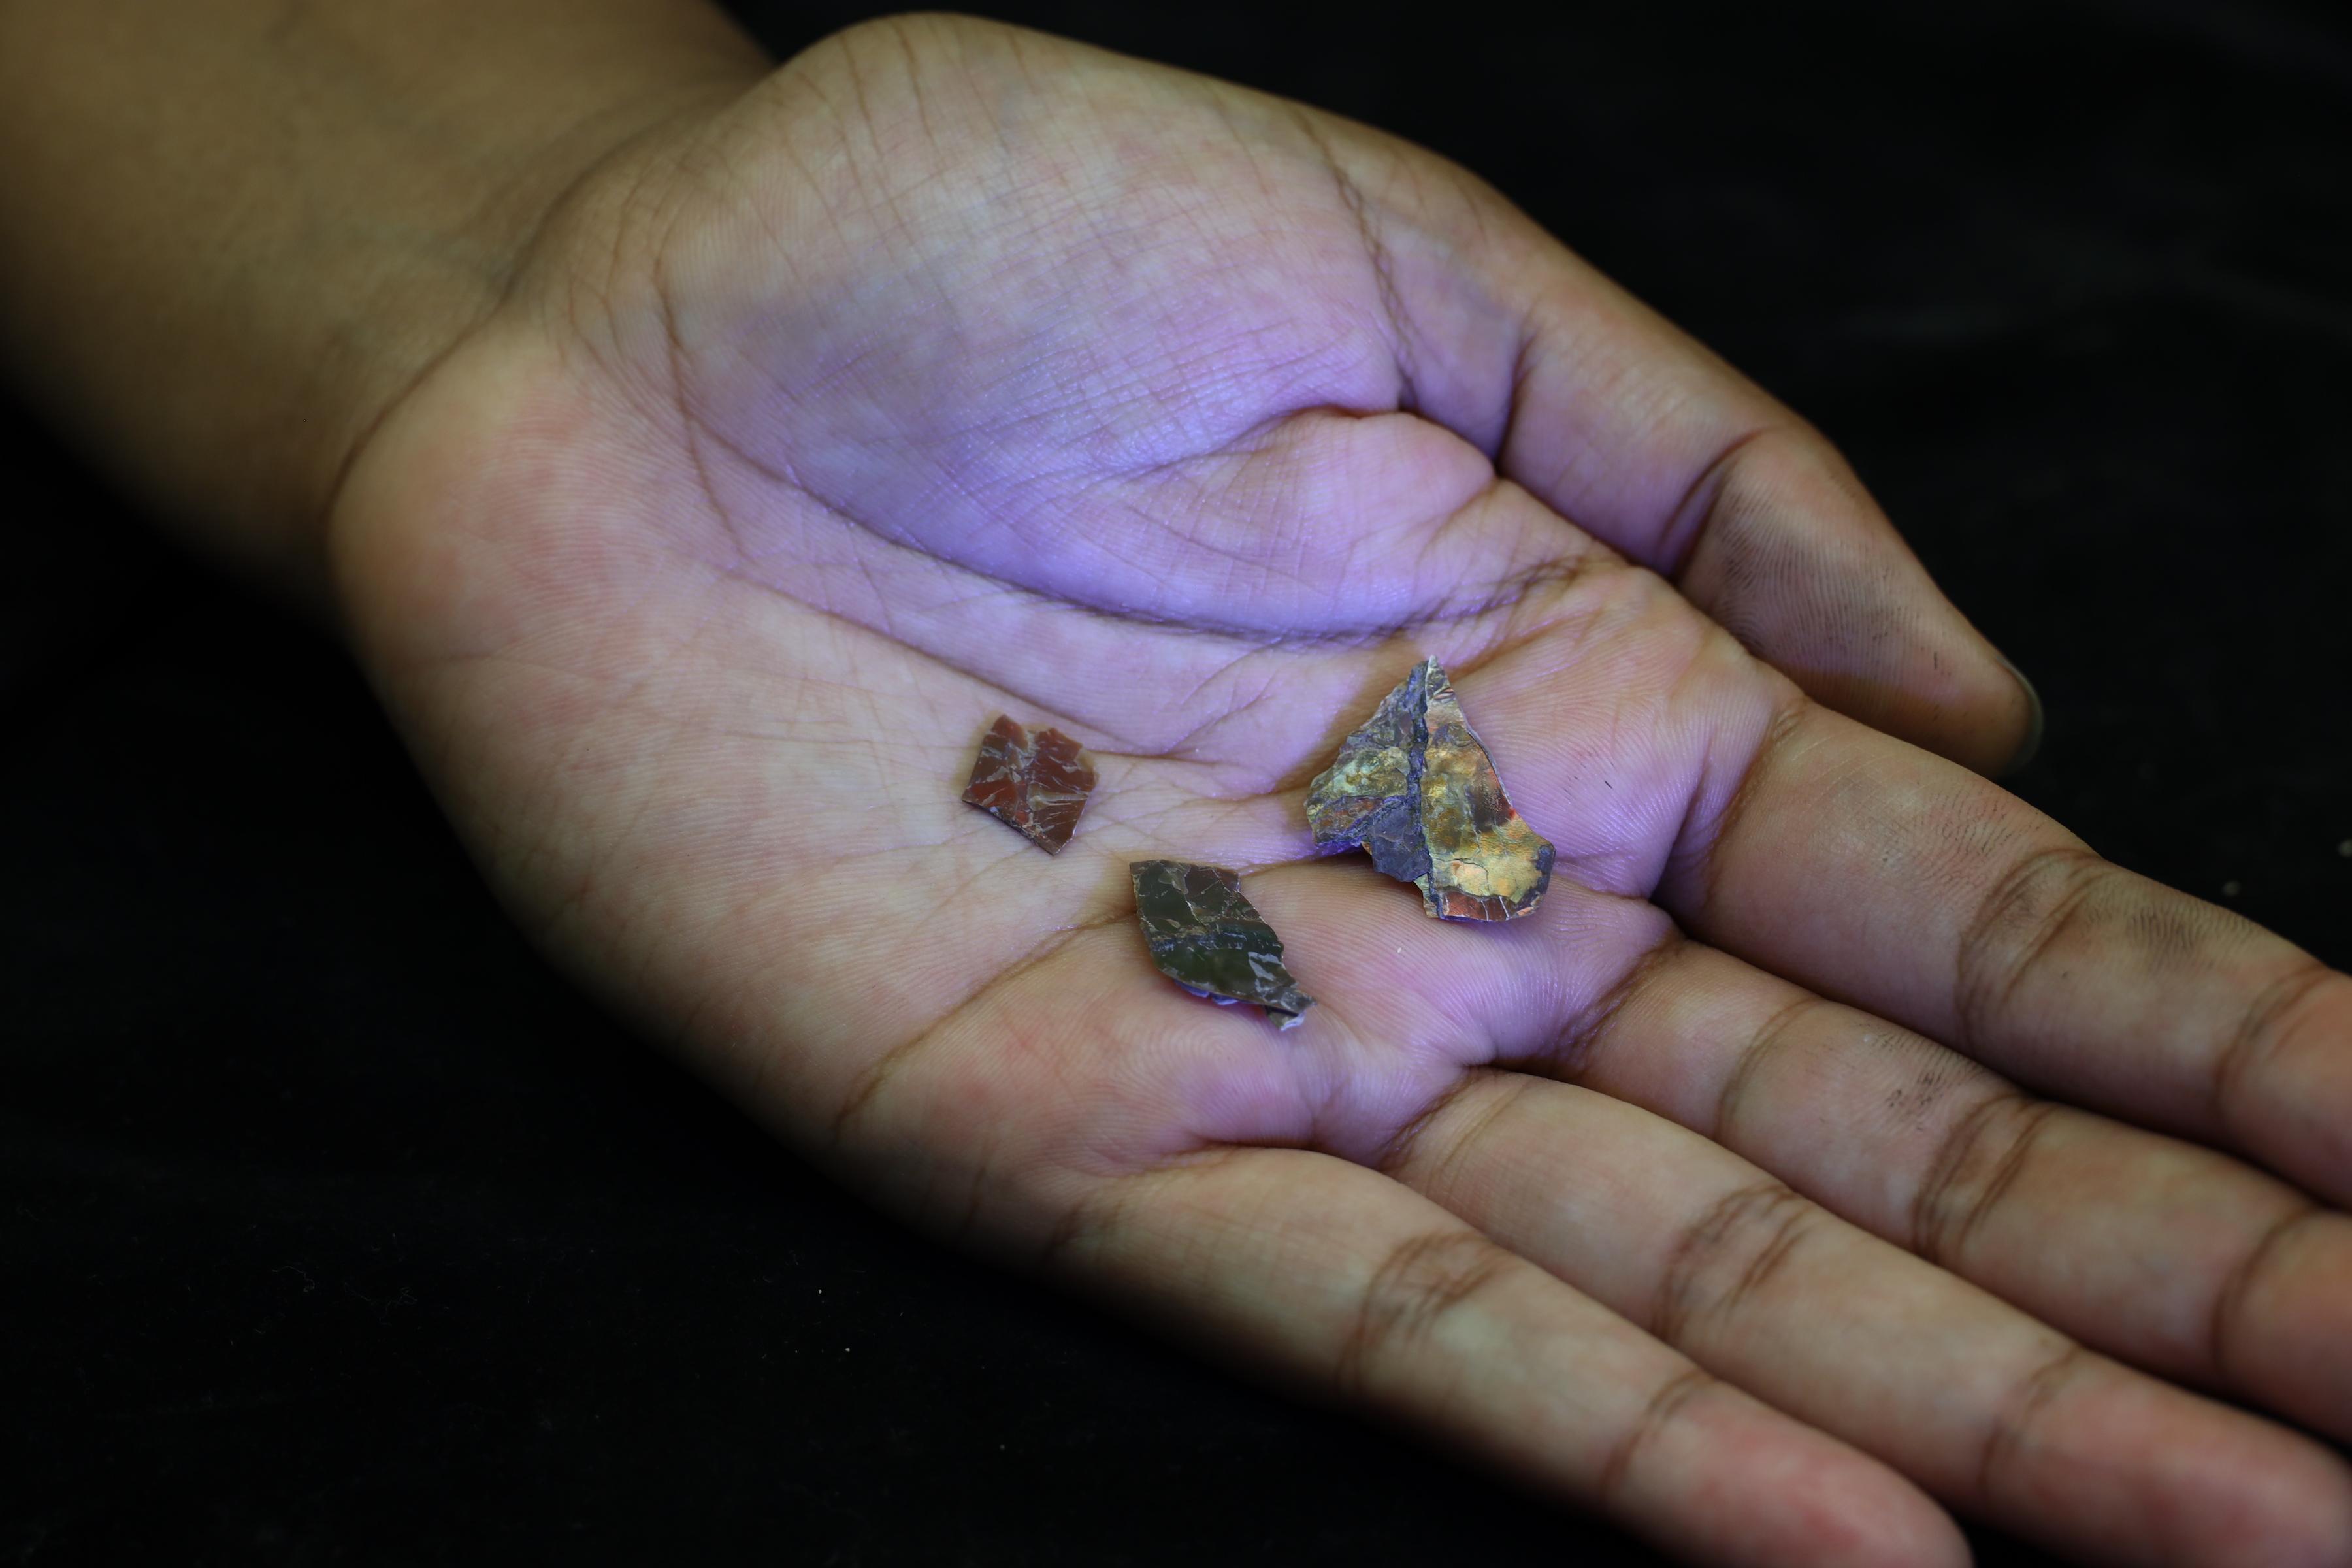 A dark-skinned hand holds three small fractured shards of stone with reflective and red-green surfaces